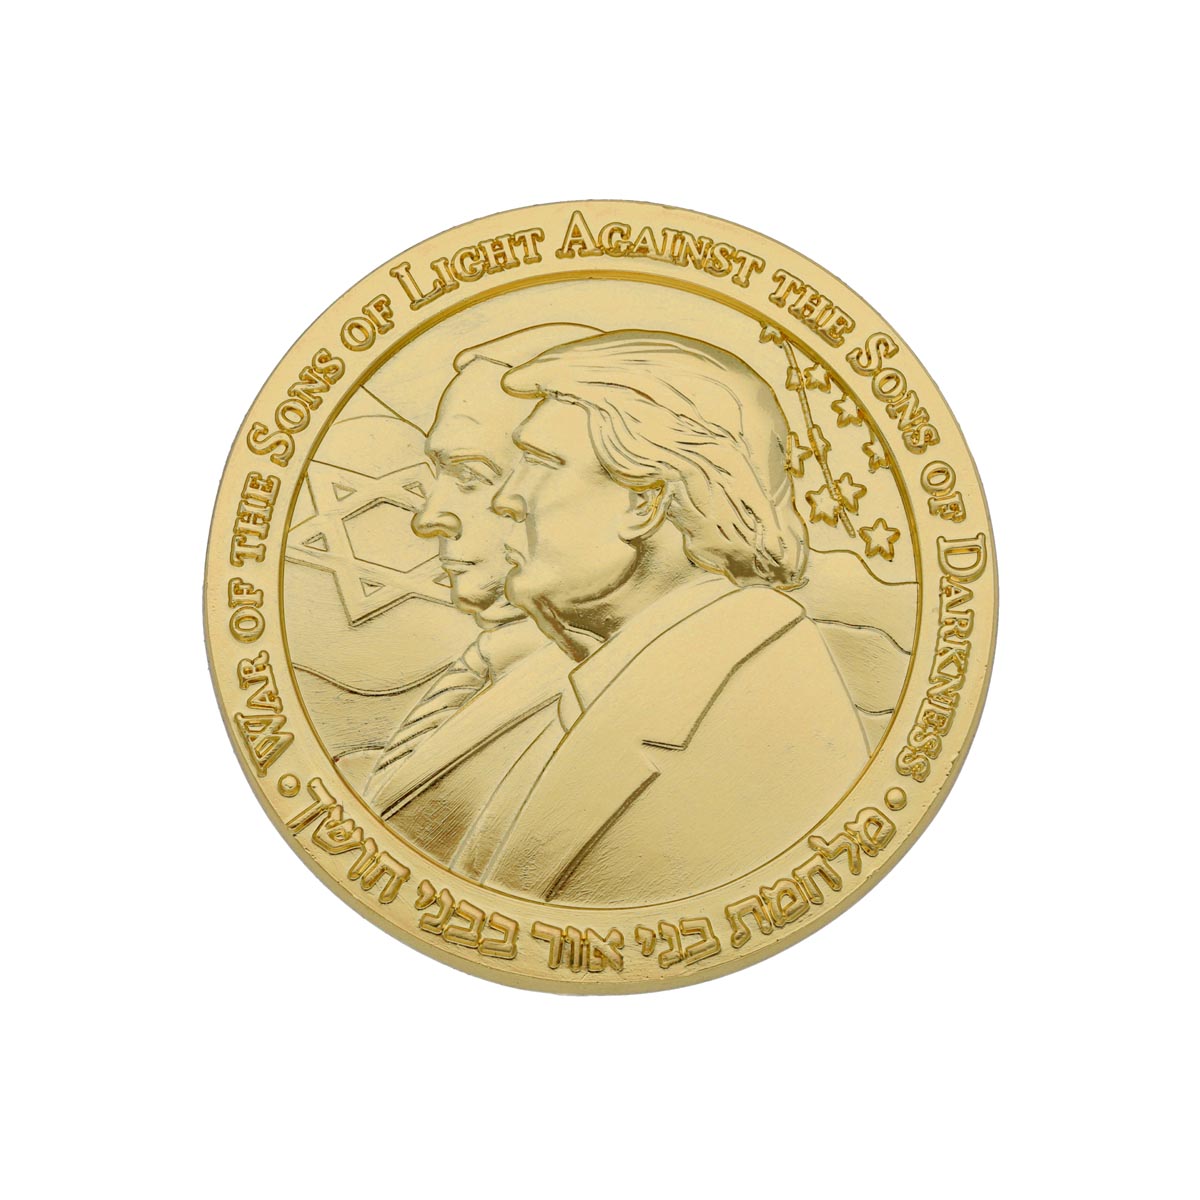 Sons of Light Against Sons of Darkness coin - gold plated (5409590050966) (7910544933014)